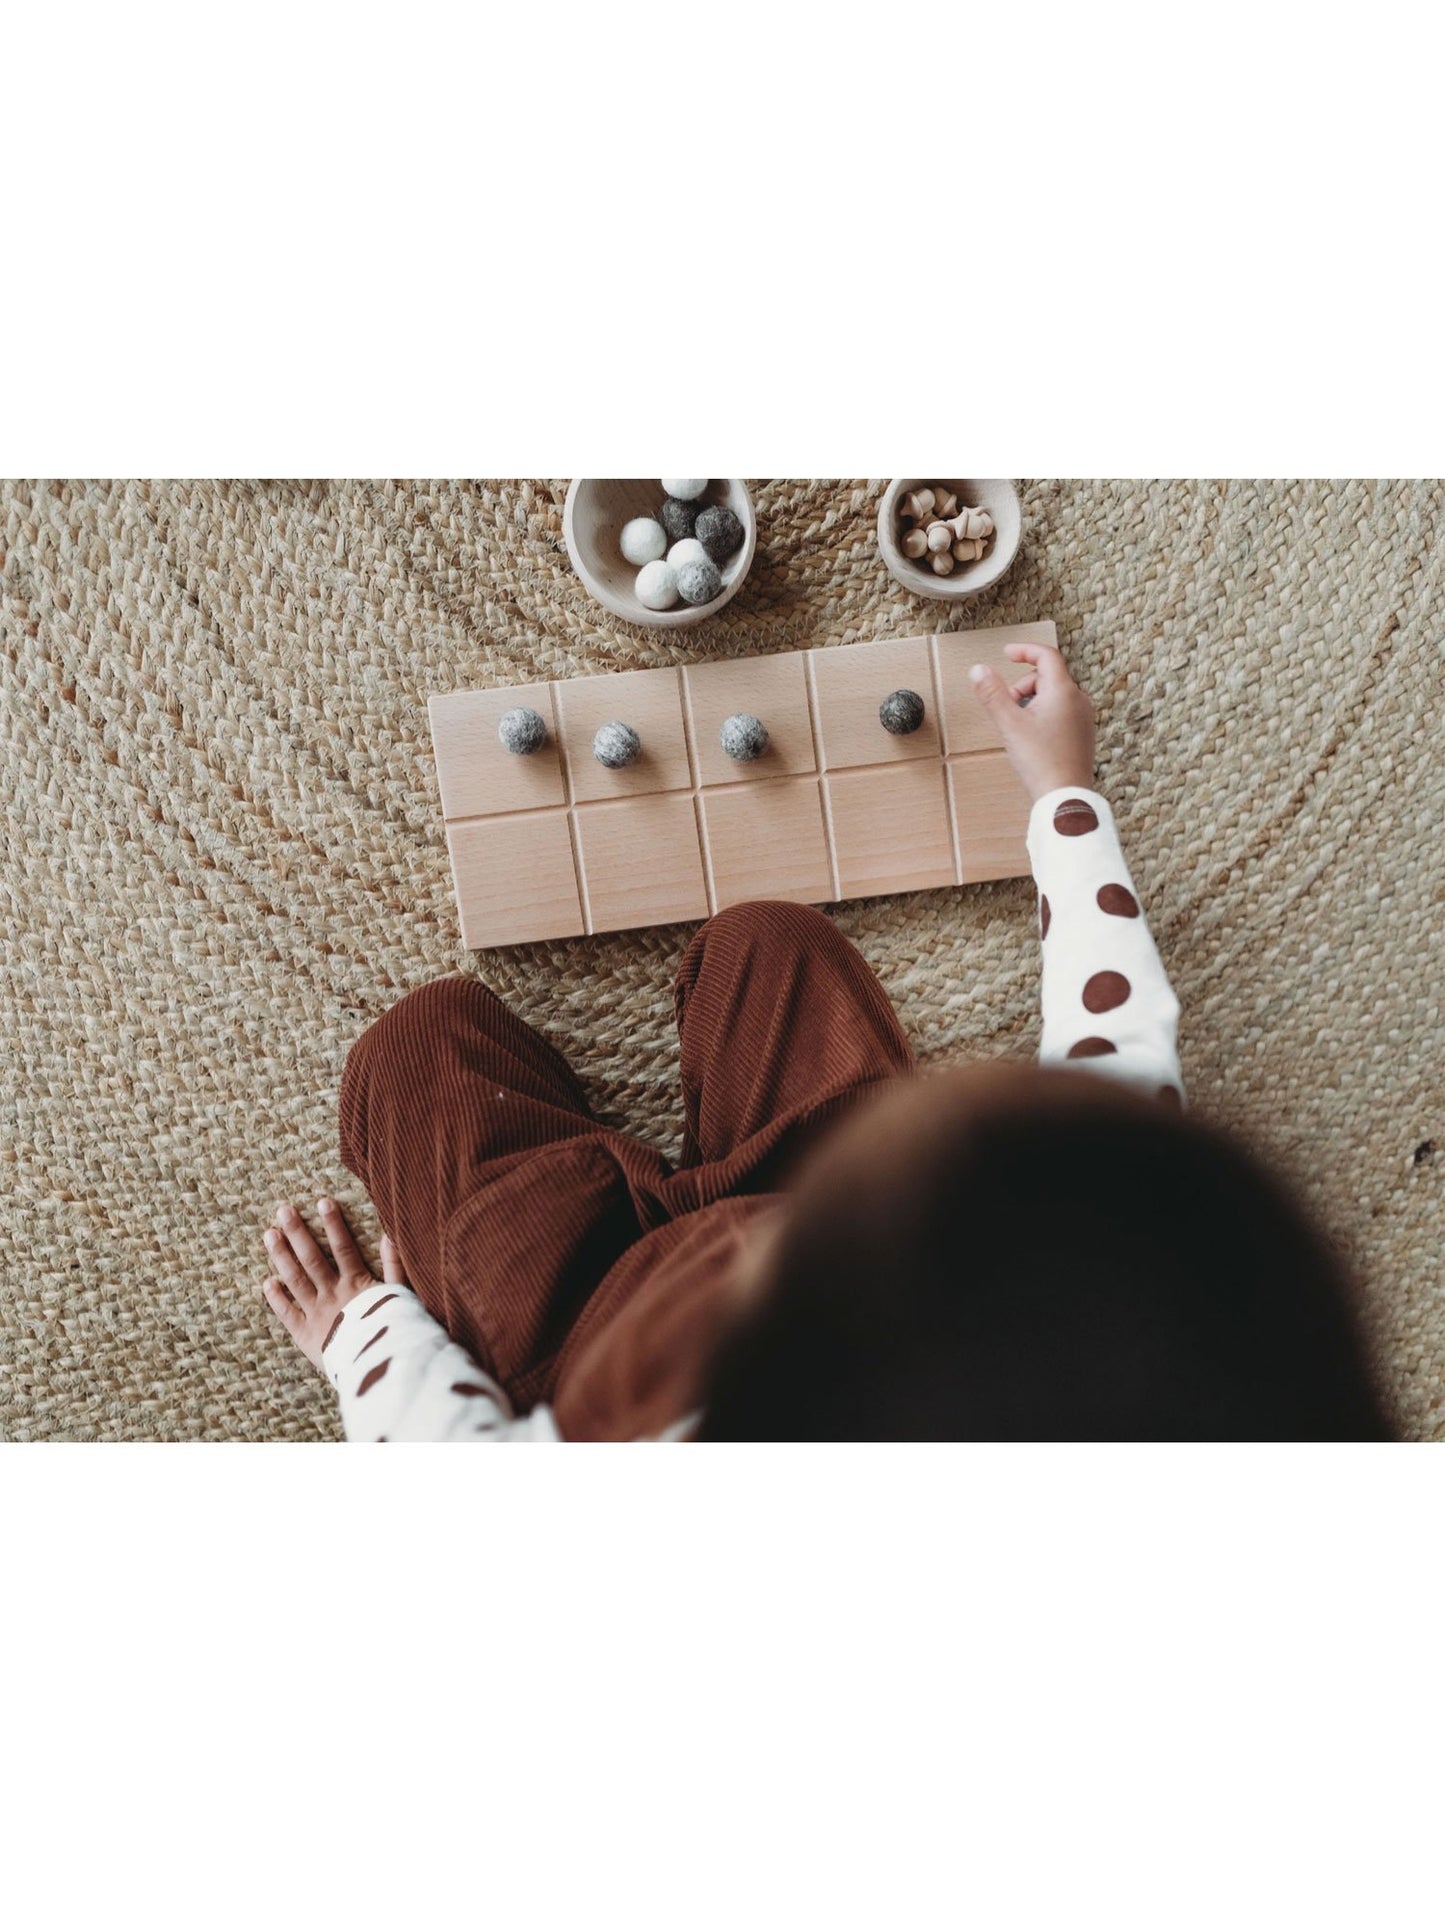 The Little Coach House Tens Frame Montessori Learning Resource